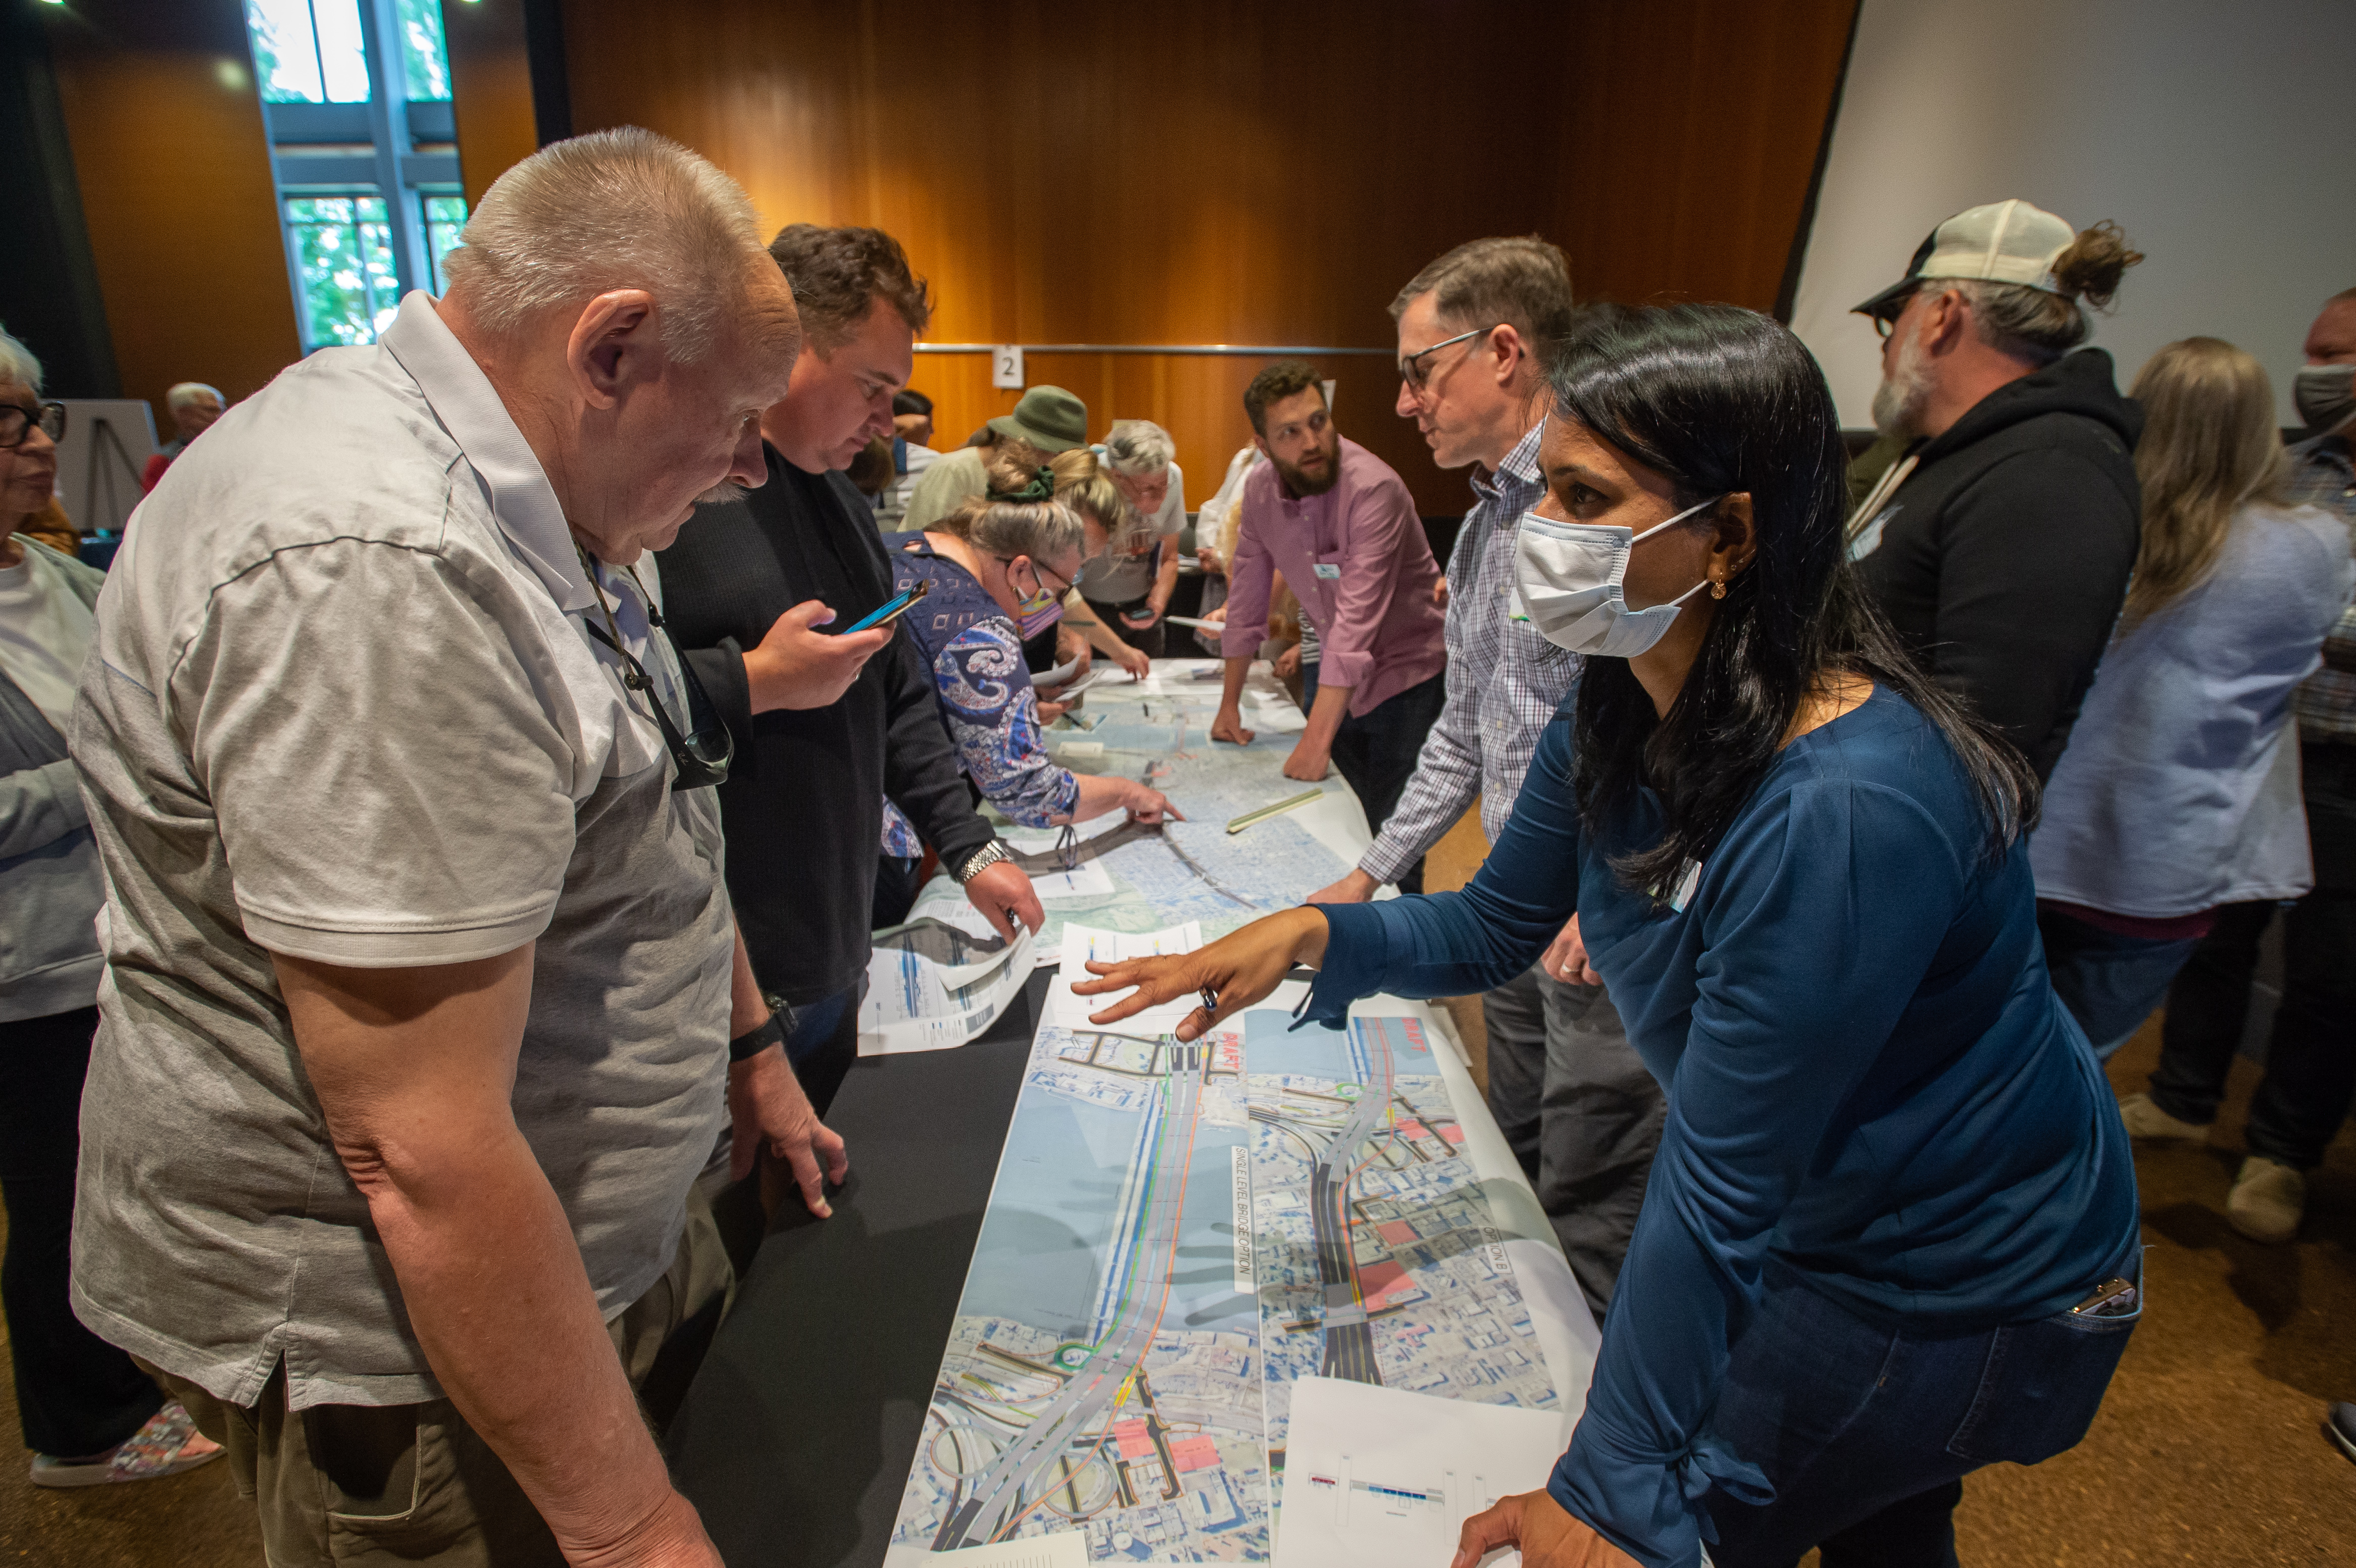 Image of IBR staff and community members discussing the program over a map.